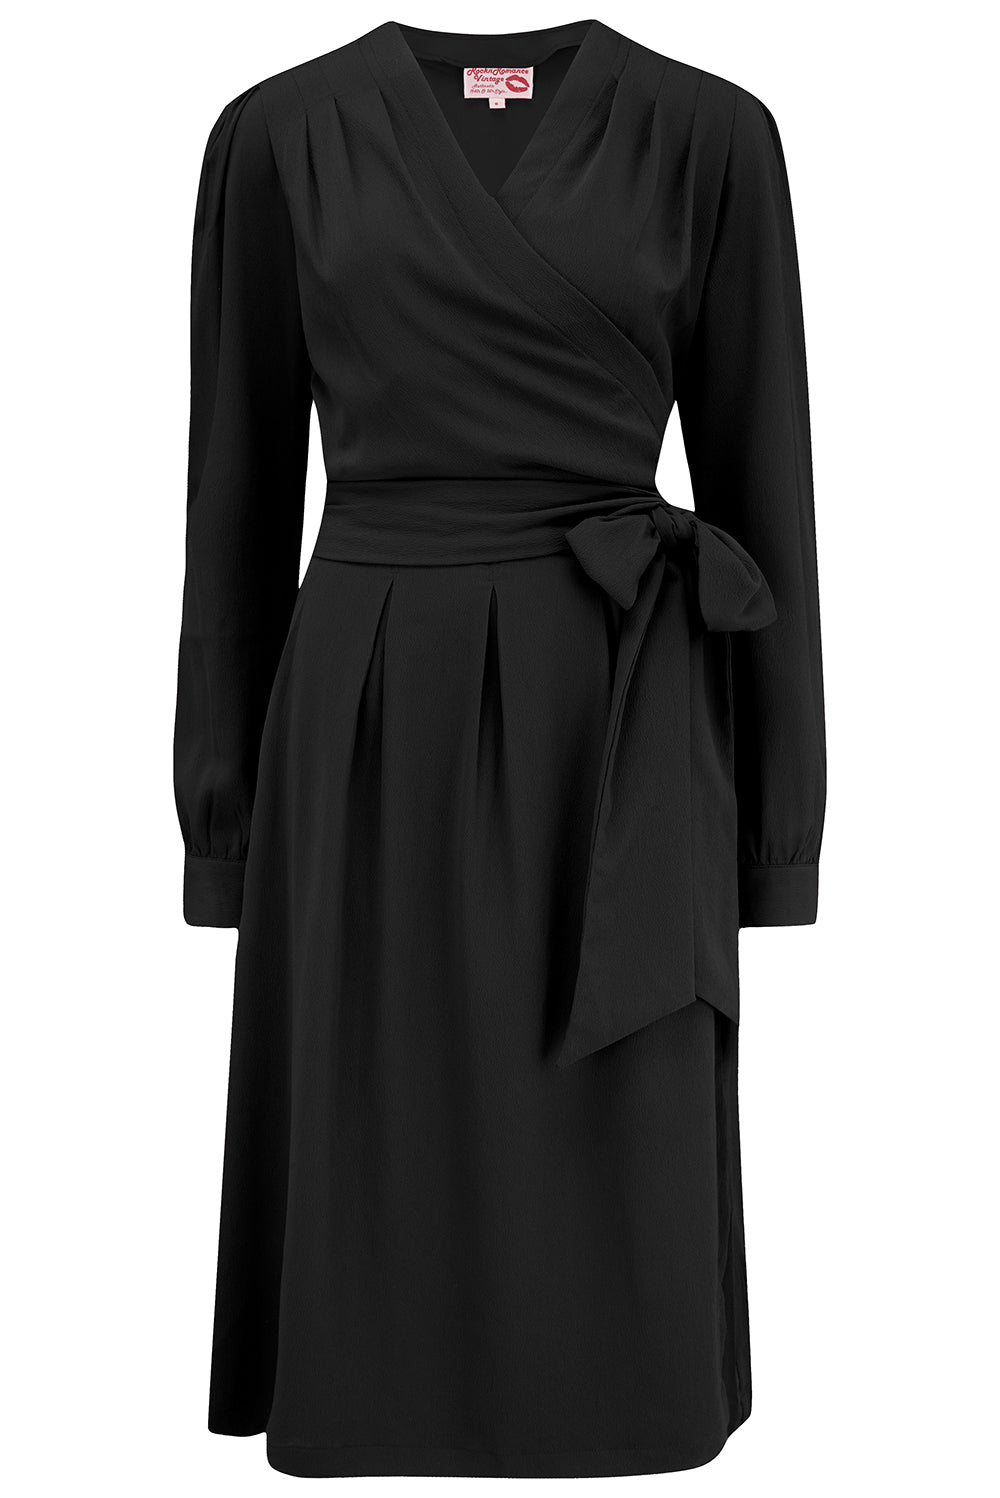 The "Evie" Long Sleeve Wrap Dress in Black, True & Authentic Late 1940s Early 1950s Vintage Style - True and authentic vintage style clothing, inspired by the Classic styles of CC41 , WW2 and the fun 1950s RocknRoll era, for everyday wear plus events like Goodwood Revival, Twinwood Festival and Viva Las Vegas Rockabilly Weekend Rock n Romance Rock n Romance